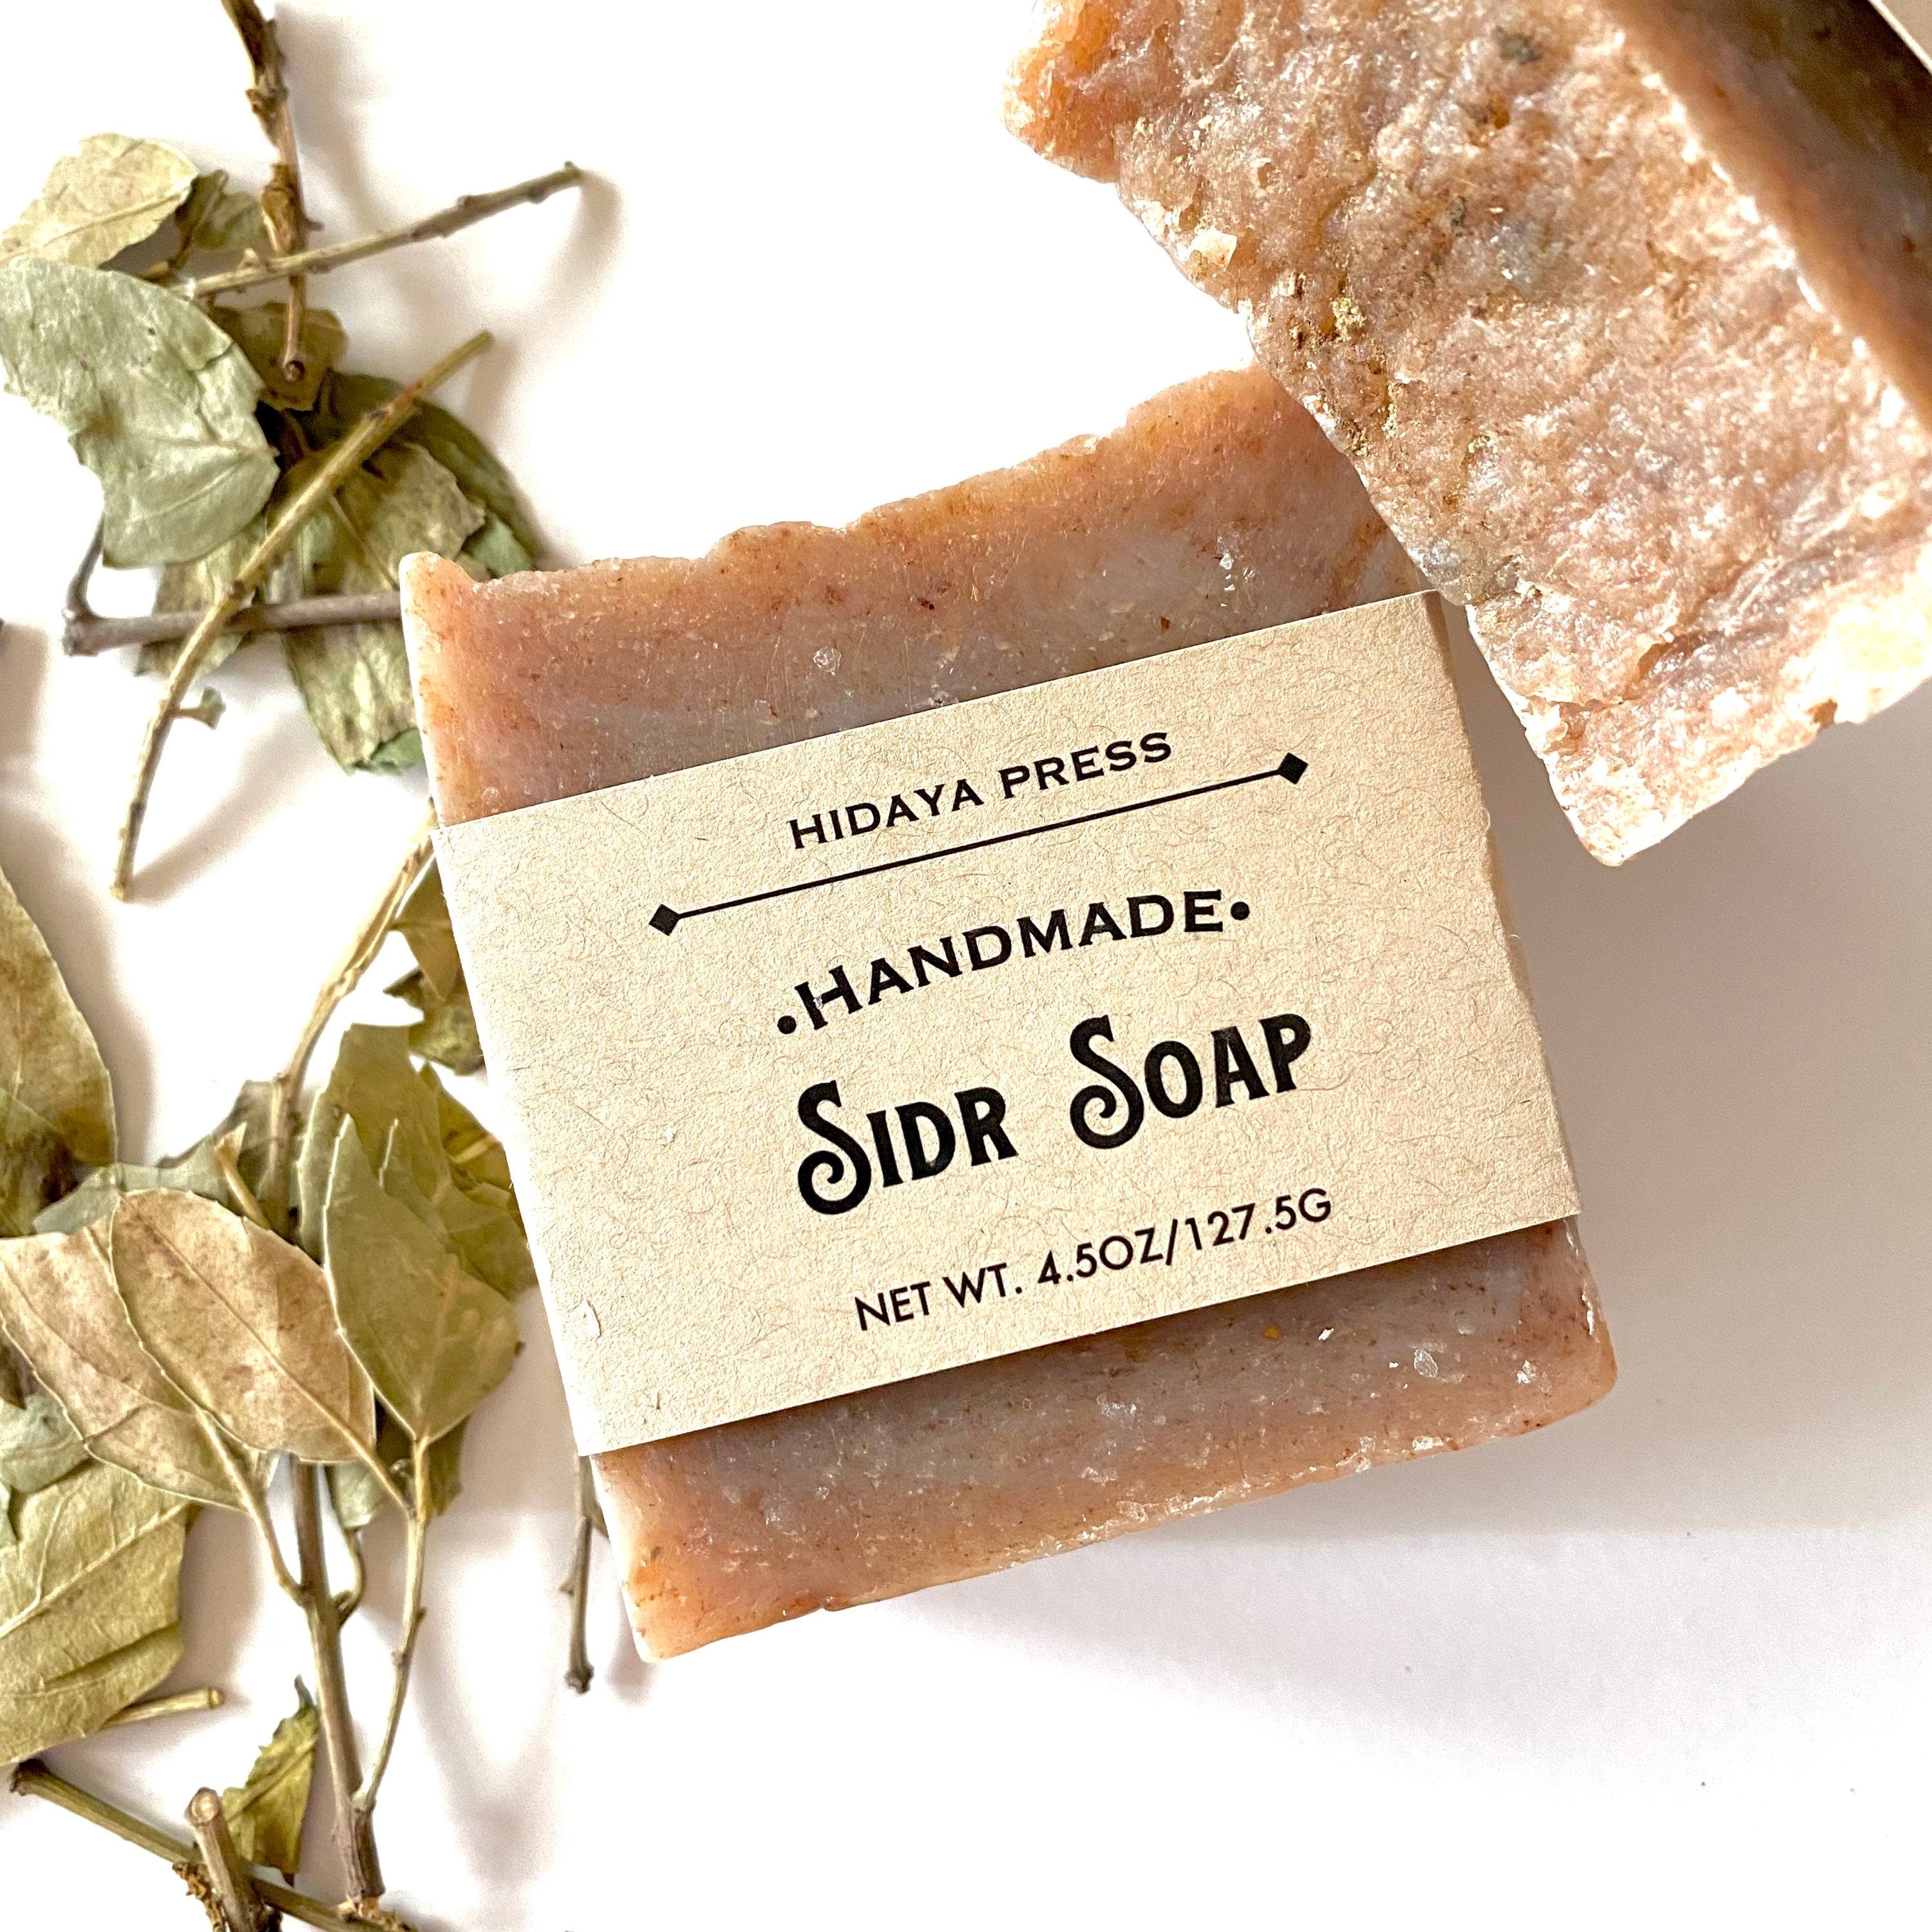 Sidr Soap